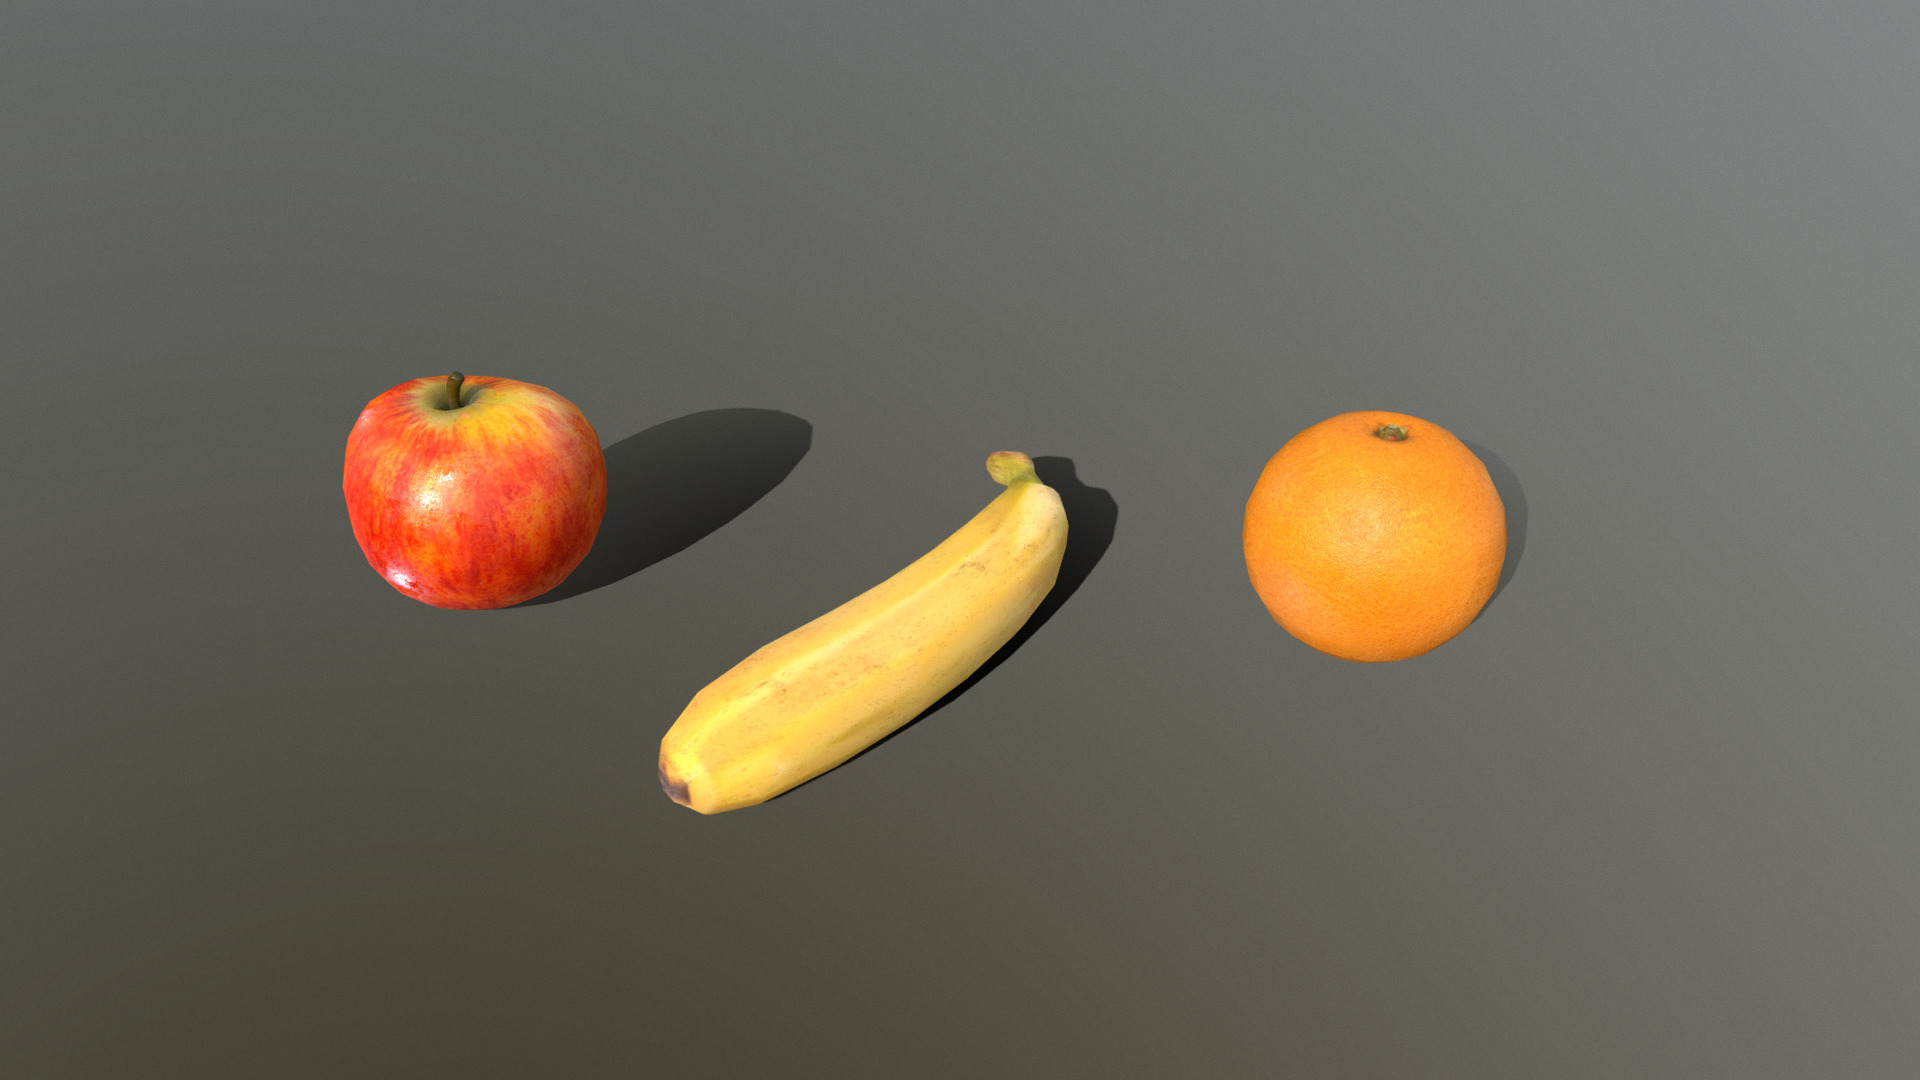 3D model HIE Fruit D180302 - This is a 3D model of the HIE Fruit D180302. The 3D model is about a banana and an orange.